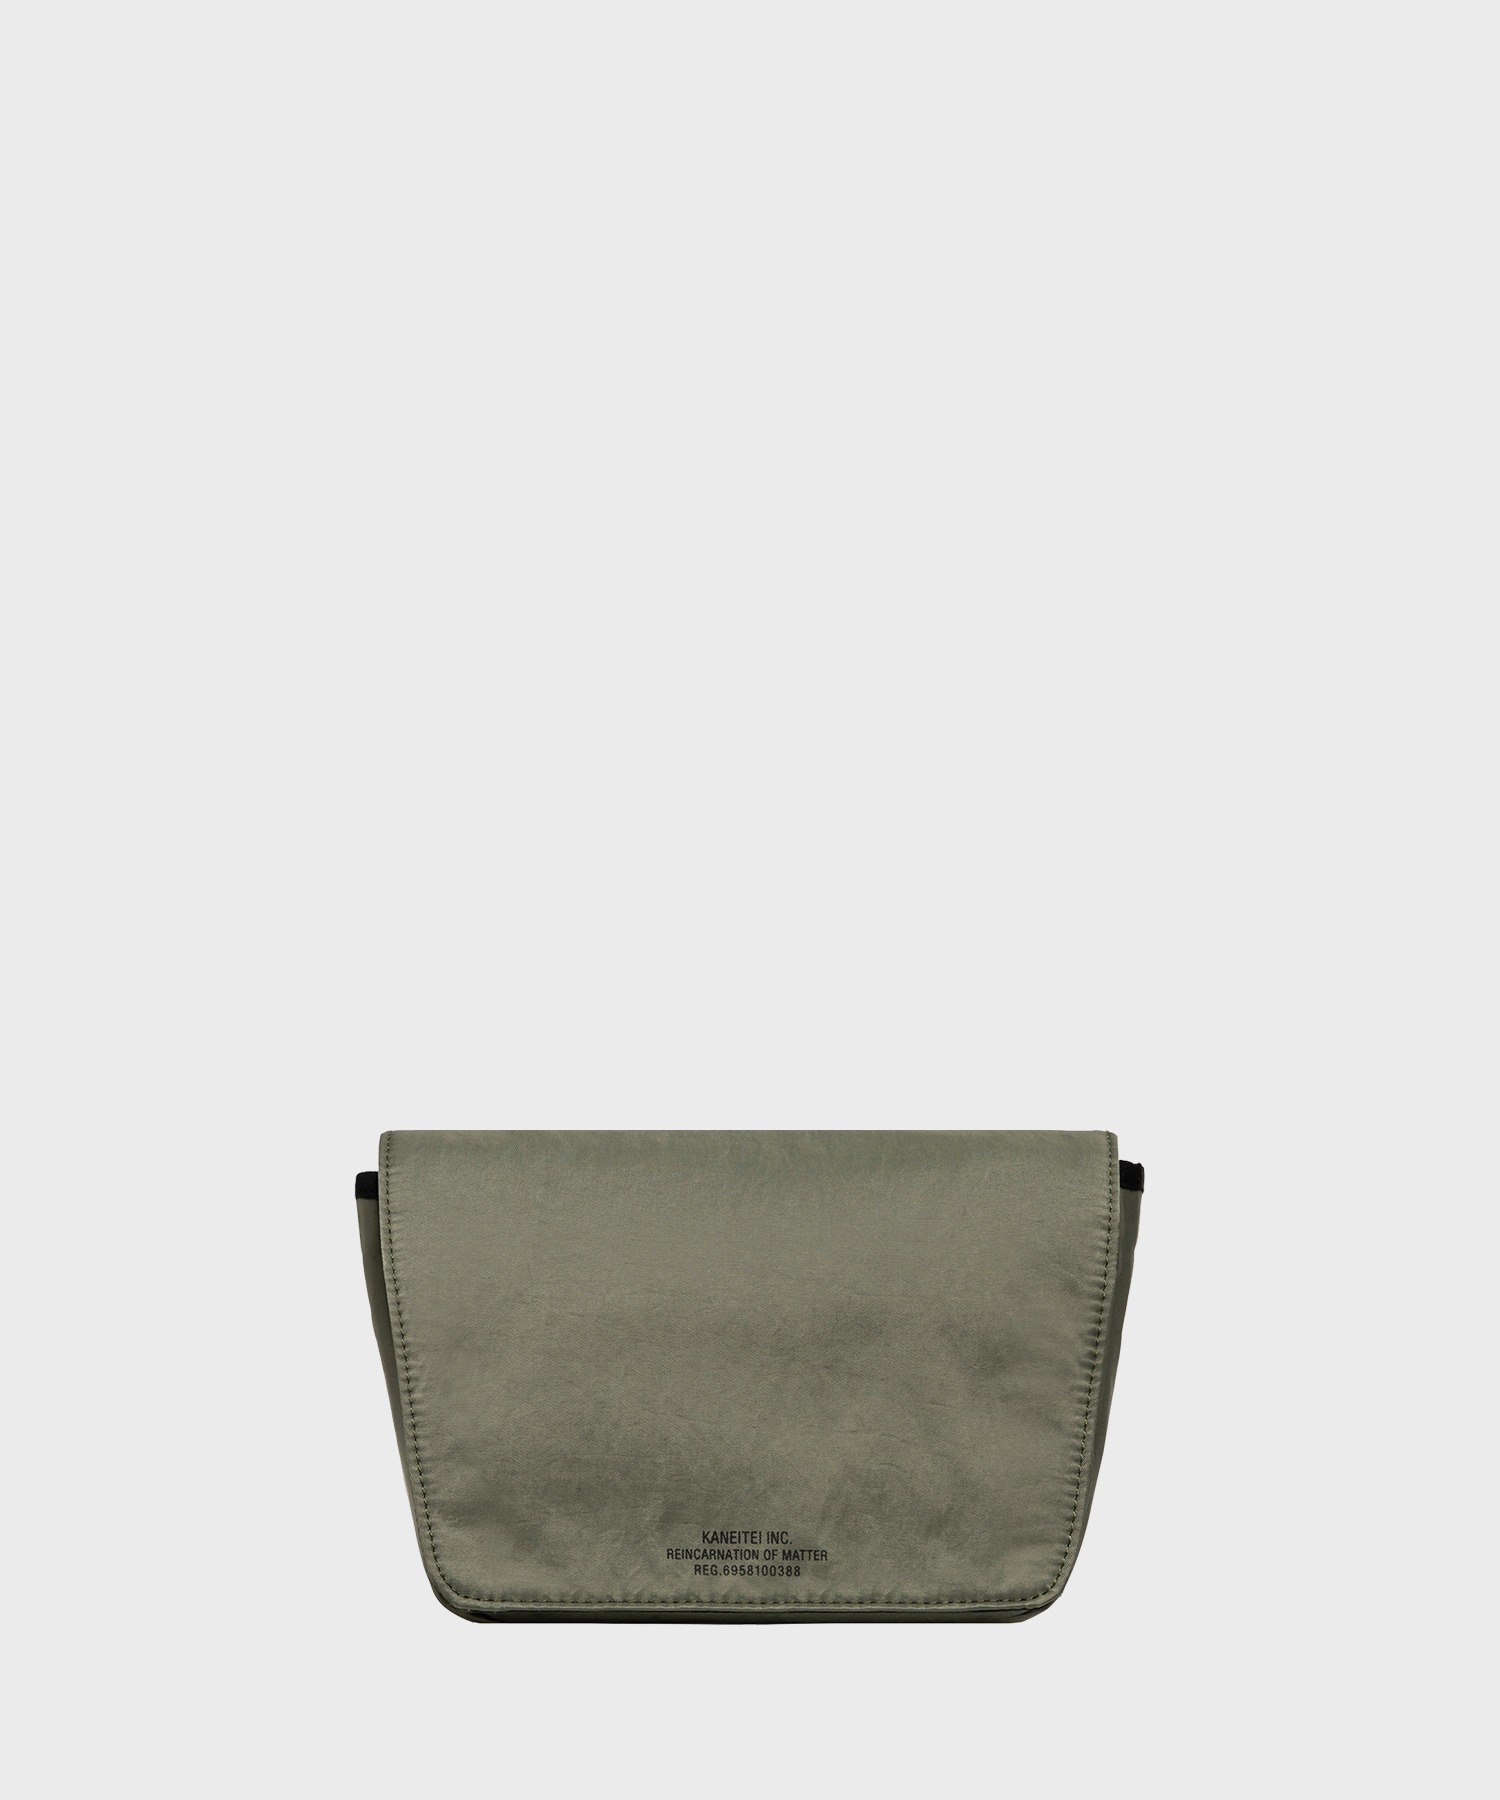 CHICAGO MESSENGER BAG S (OLIVE DRAB) / RECYCLED